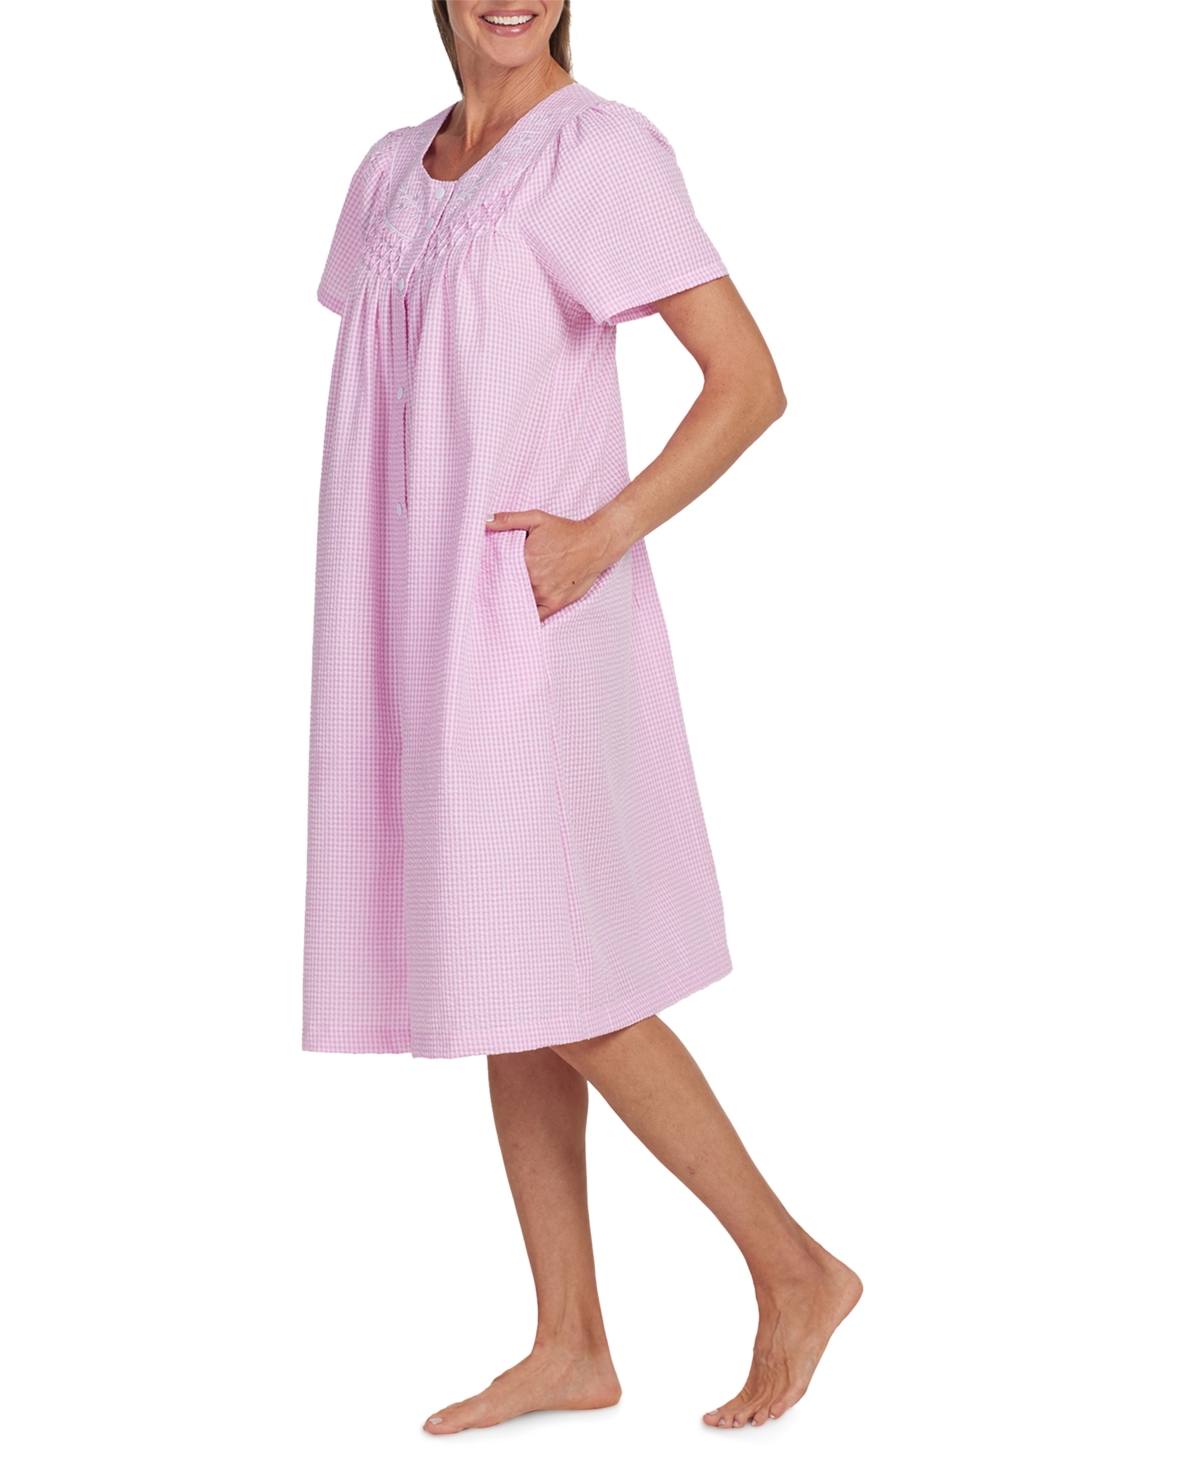 Plus Size Embroidered Short Grip Robe - Pink White Check